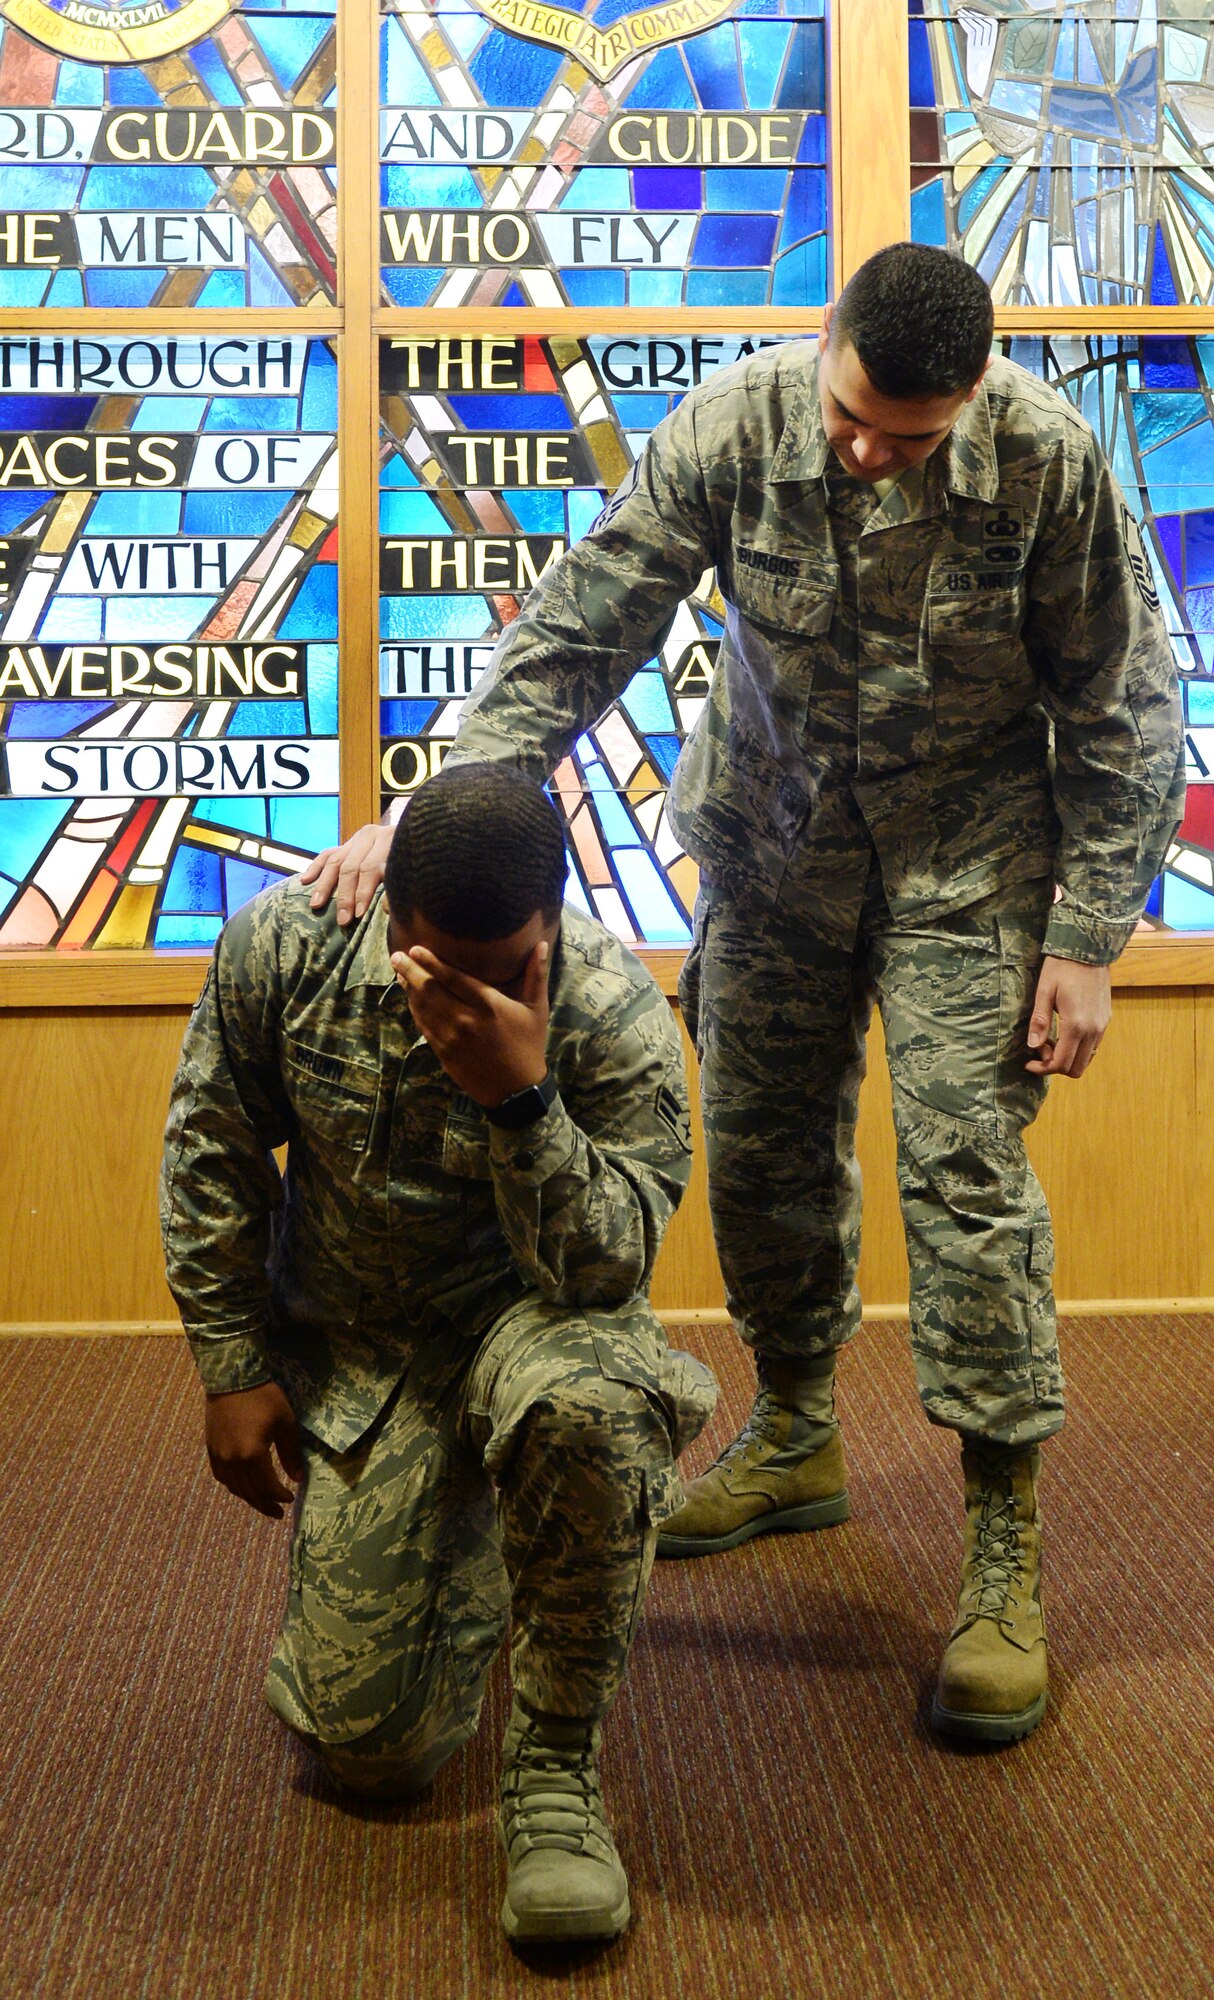 U.S. Air Force Airman 1st Class Dmarko Brown 55th Wing chaplain assistant, kneels down for a photo while U.S. Air Force Master Sgt. David Burgos, 55th Wing non-commission officer in charge chapel operations, places his hand on browns shoulder February 15, 2019, inside the Strategic Air Command Memorial chapel at Offutt Air Force Base, Nebraska.